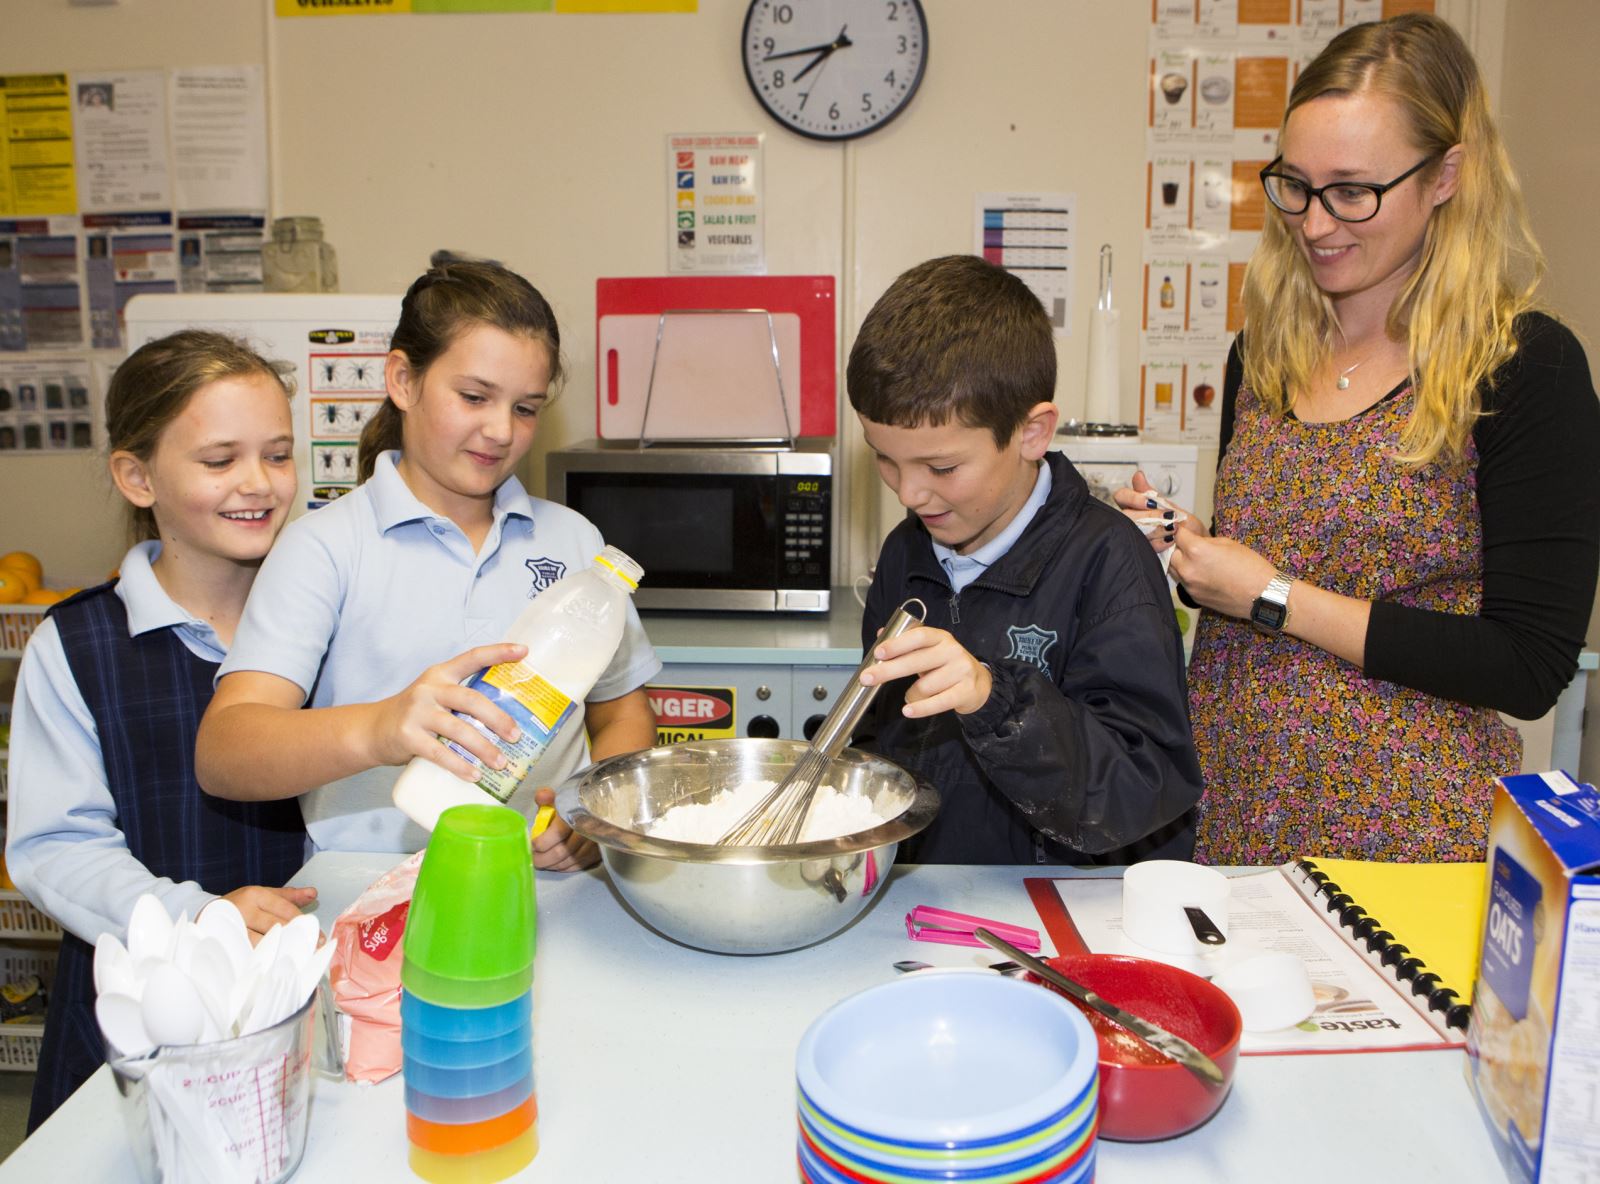 educator and children in kitchen image